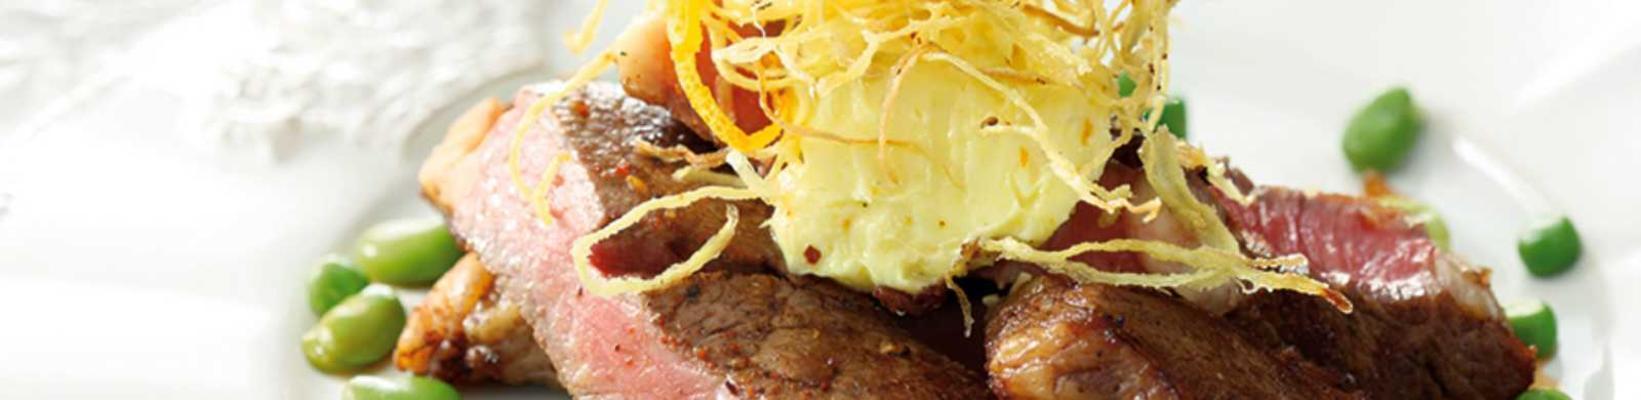 grilled argentinian steak with orange butter and fried ginger